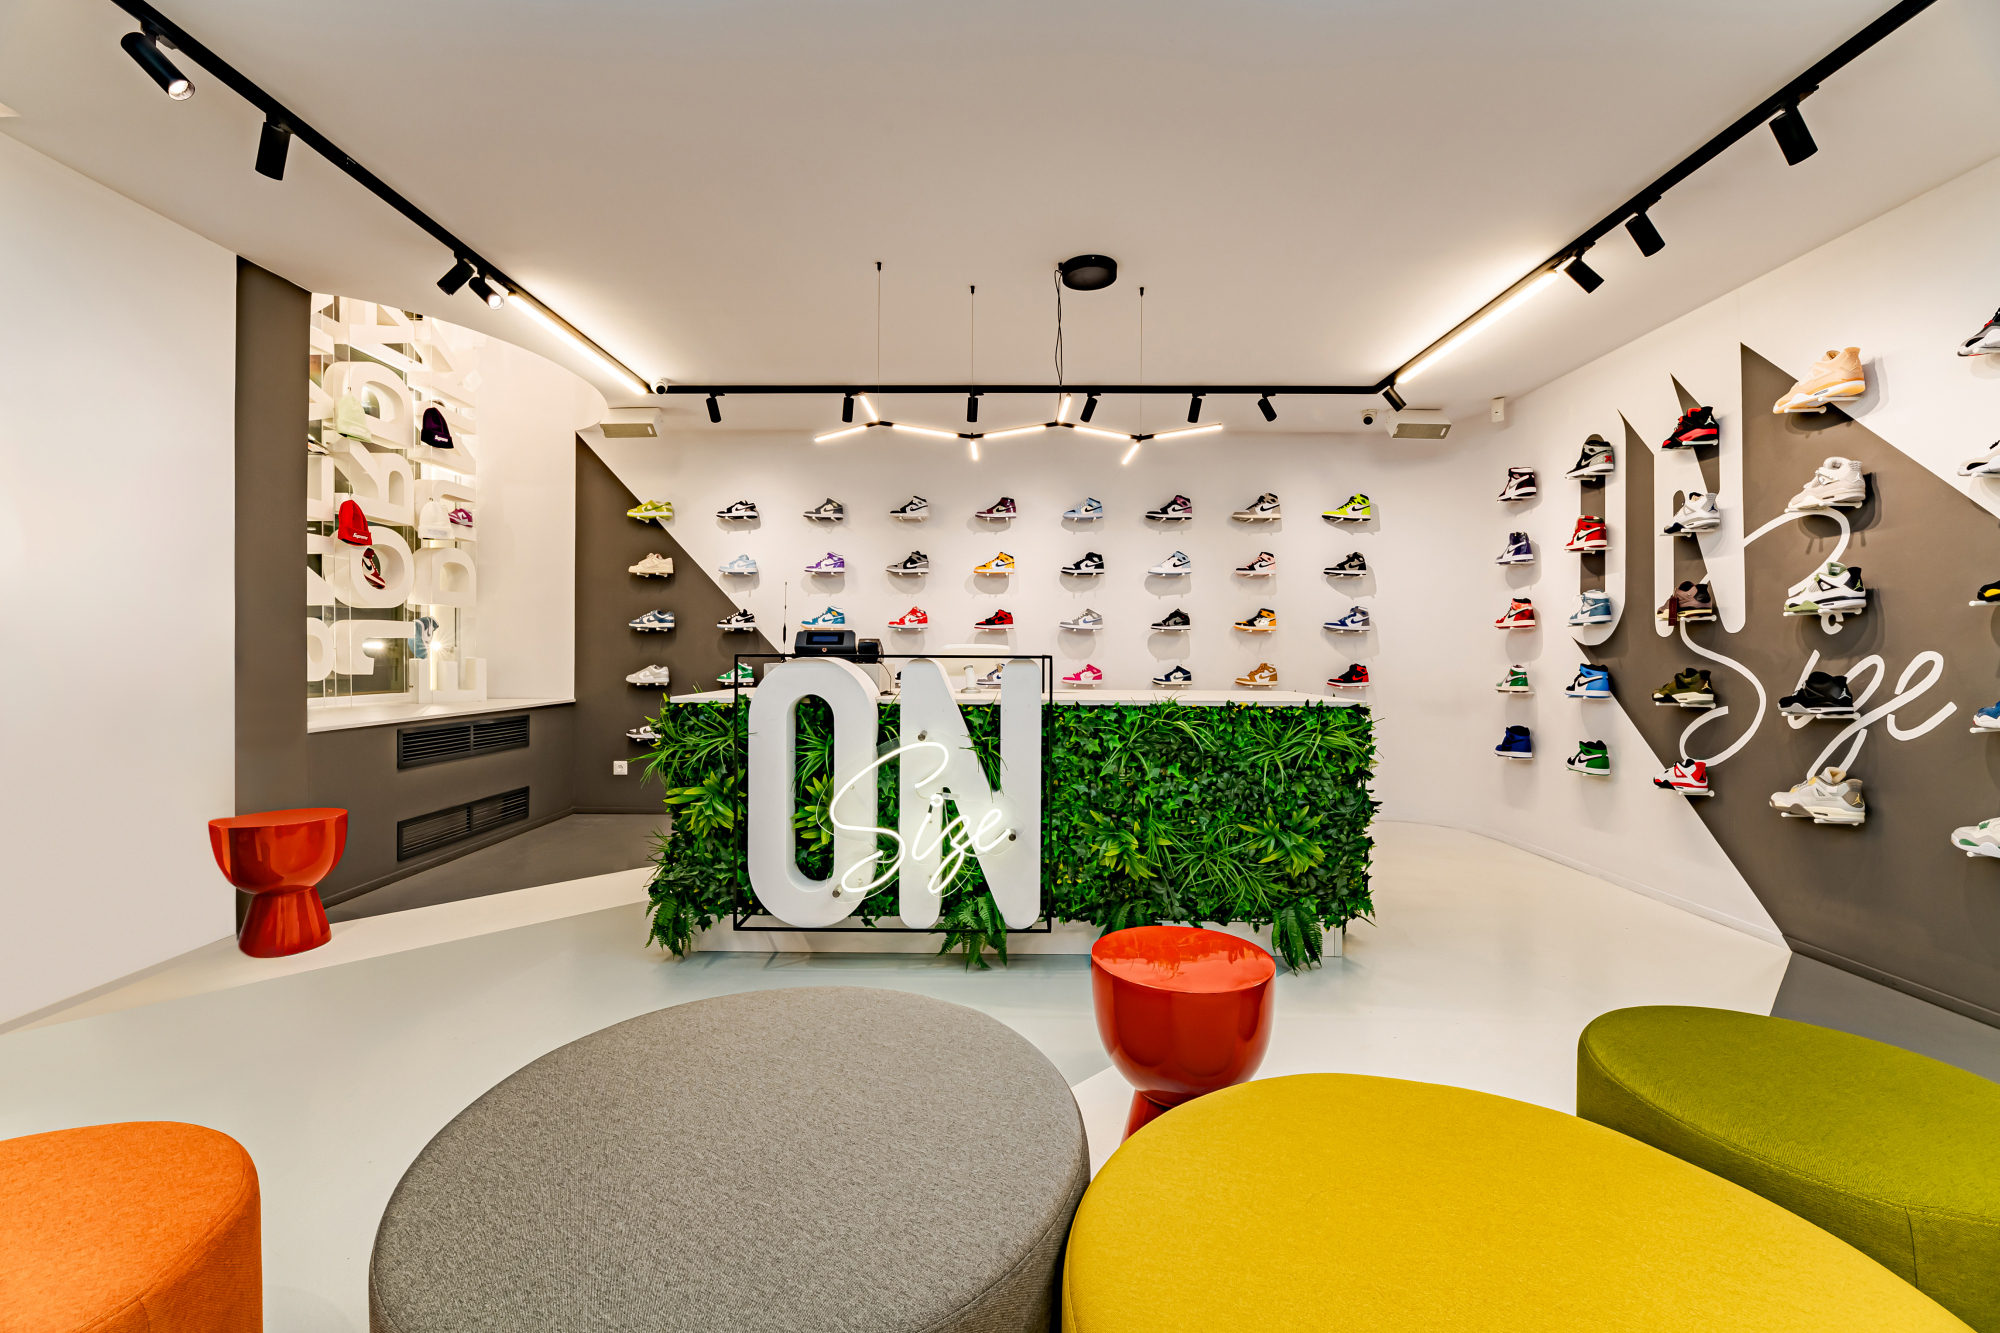 onsize sneakers - budapest